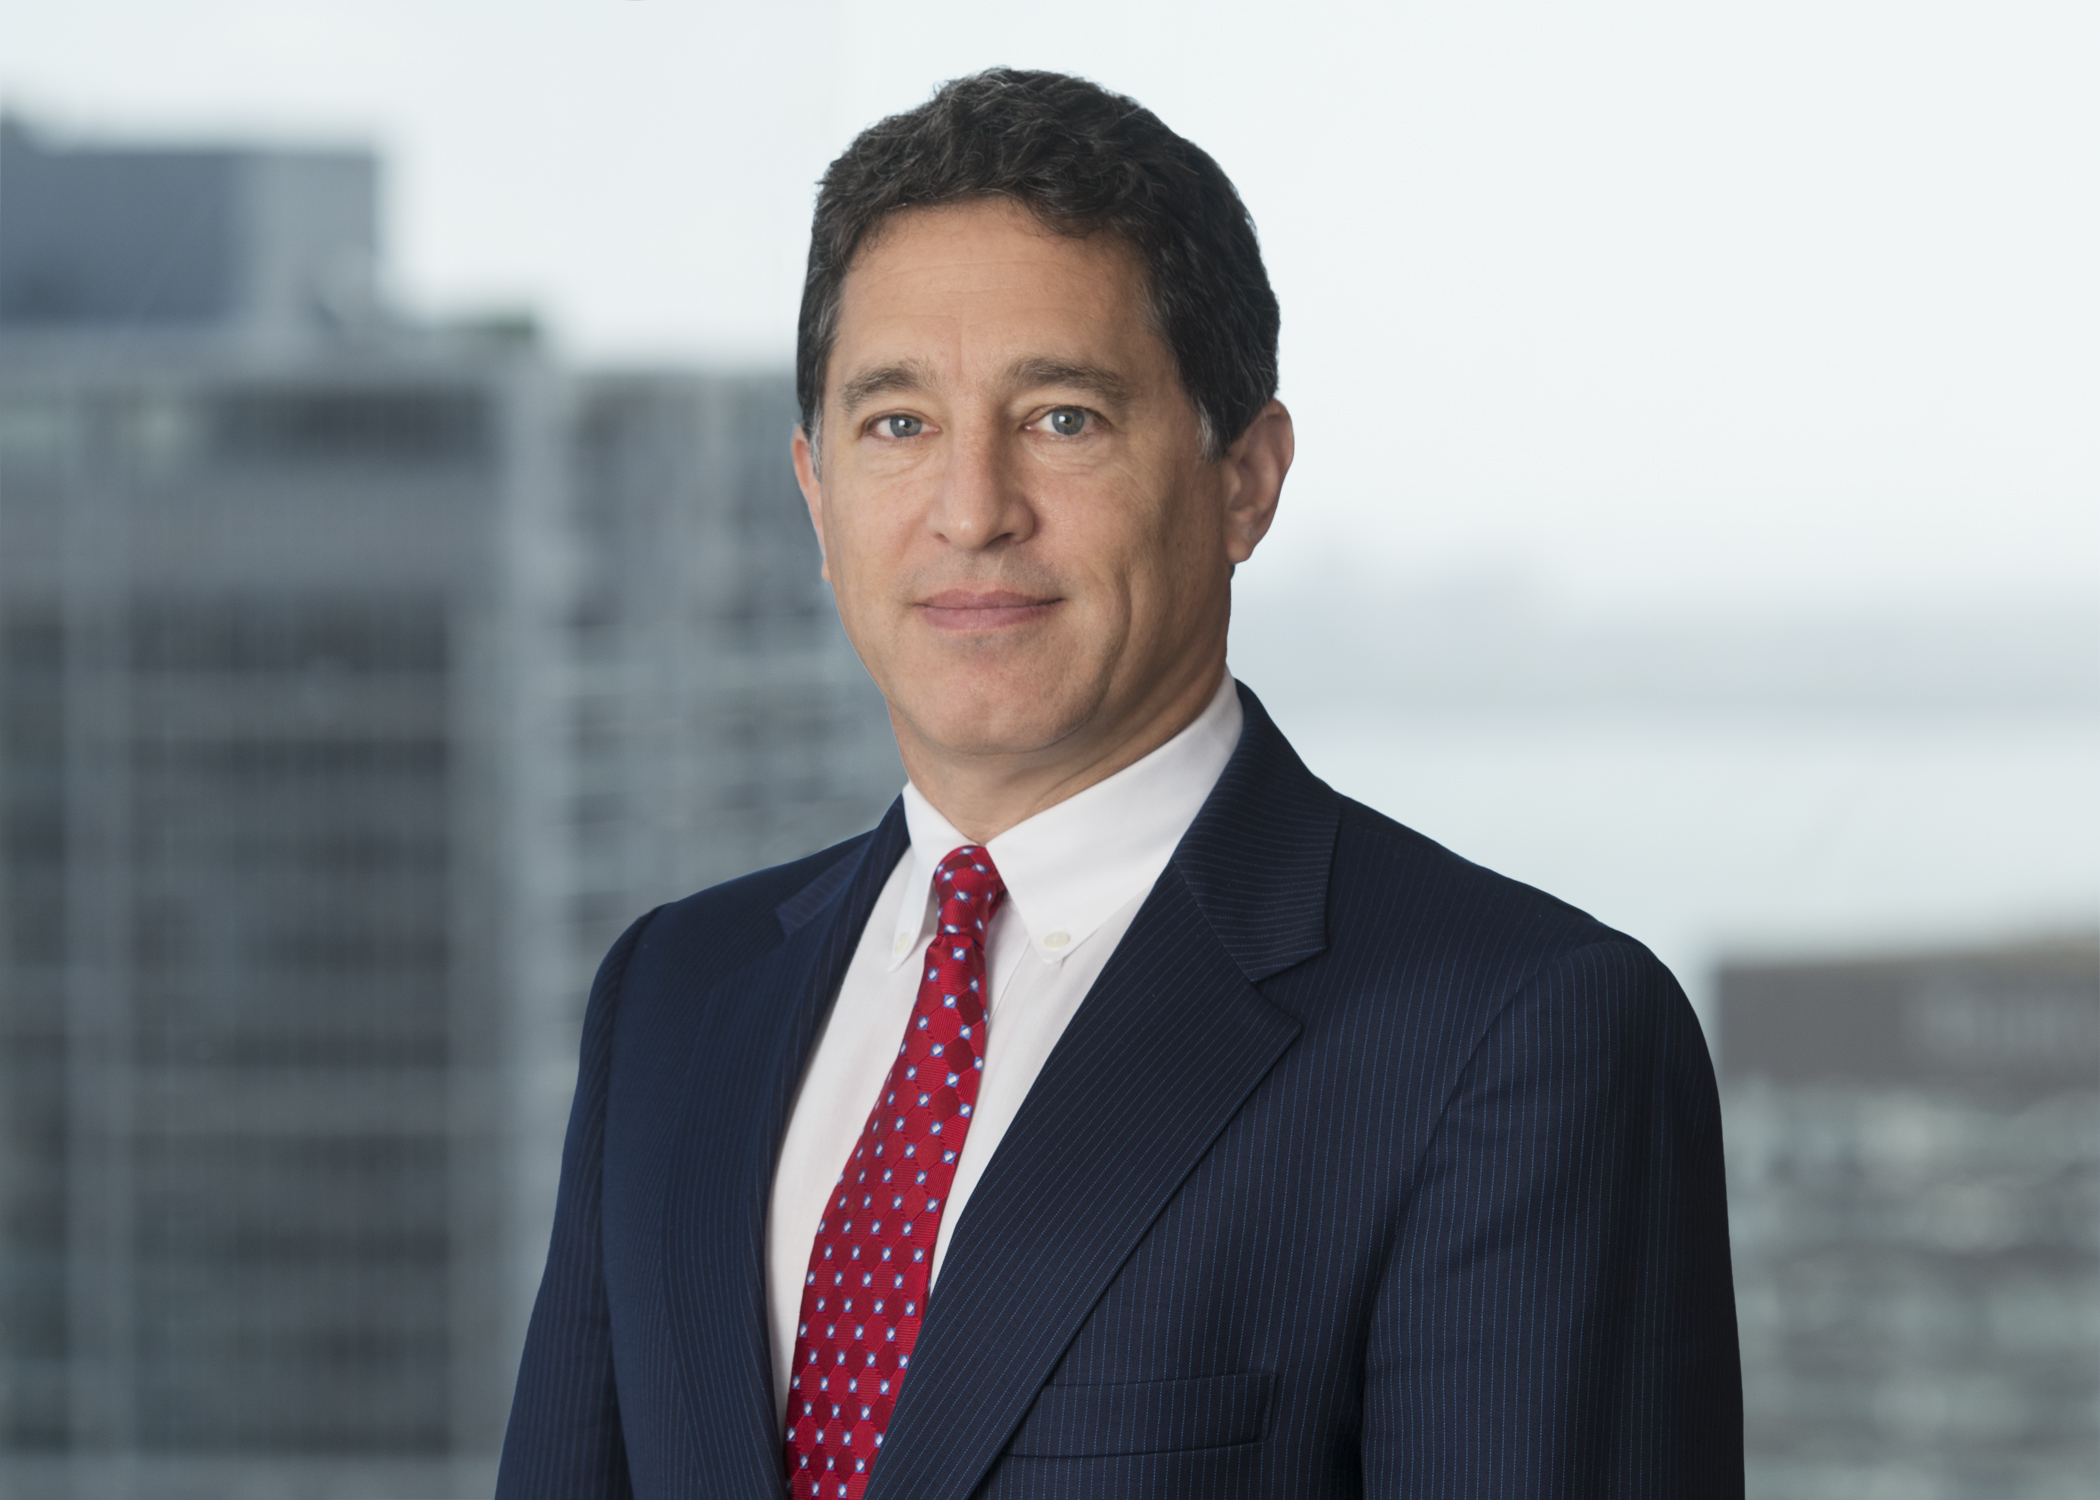 Carlton Fields’ Life, Annuity, and Retirement Solutions Industry Group Co-Chair, Markham Leventhal, Named “BTI Client Service All-Star” for 2019